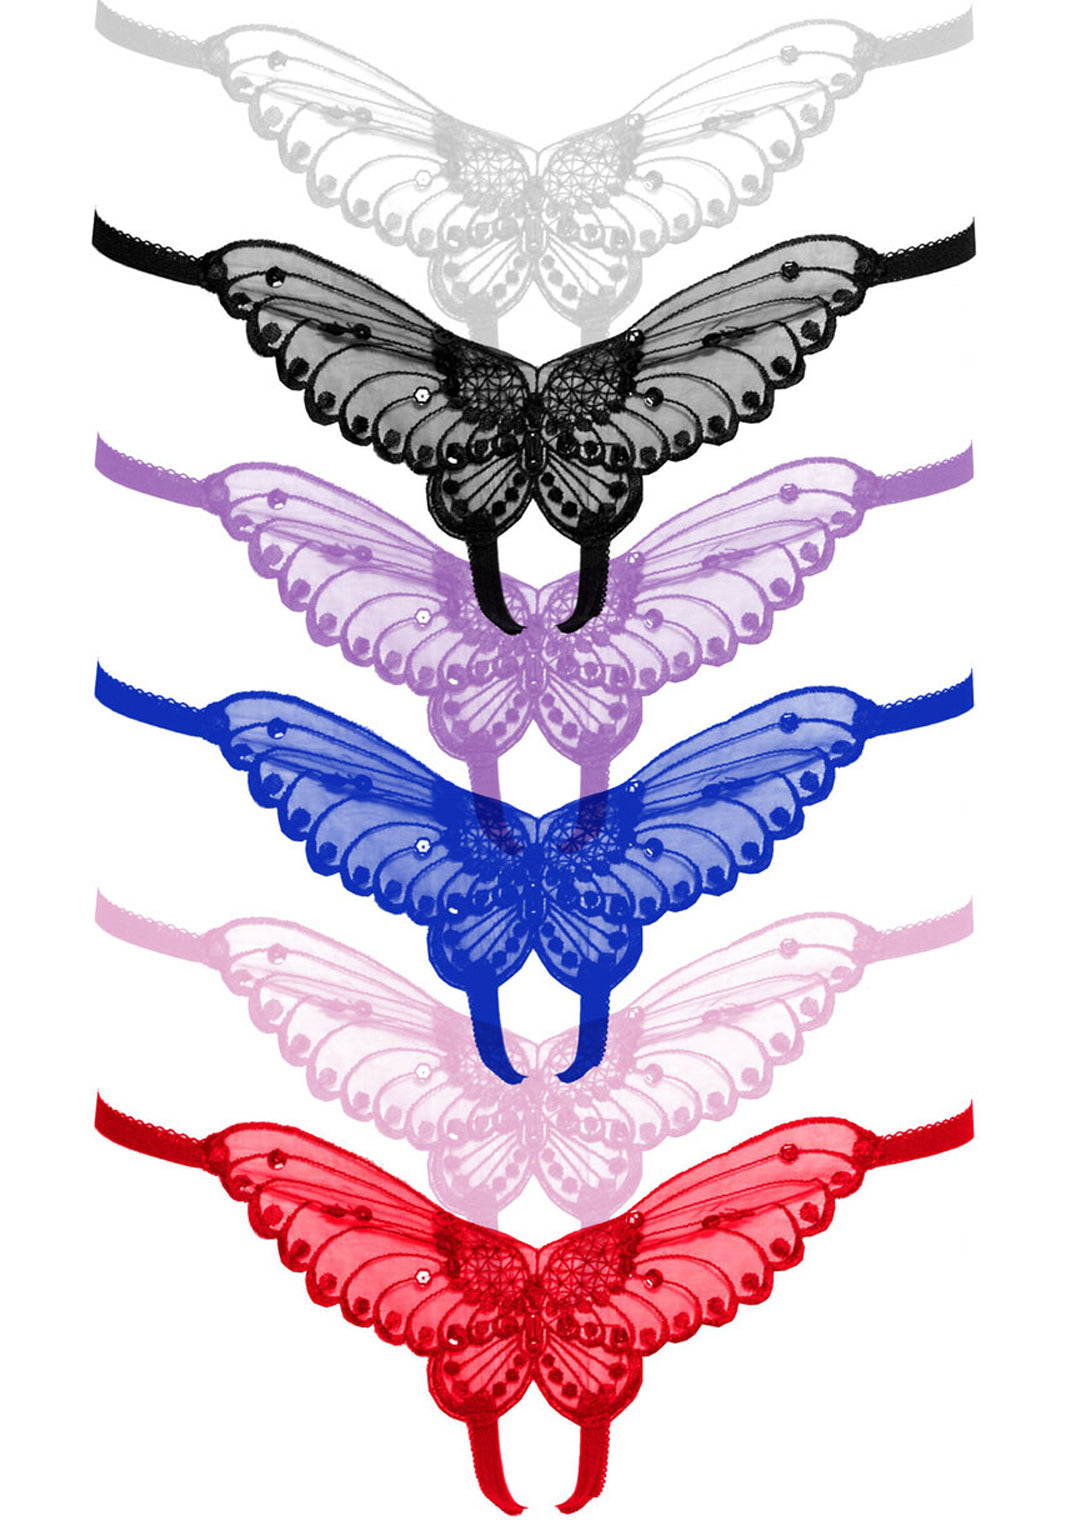 Butterfly Crotchless Panty - Assorted colors.